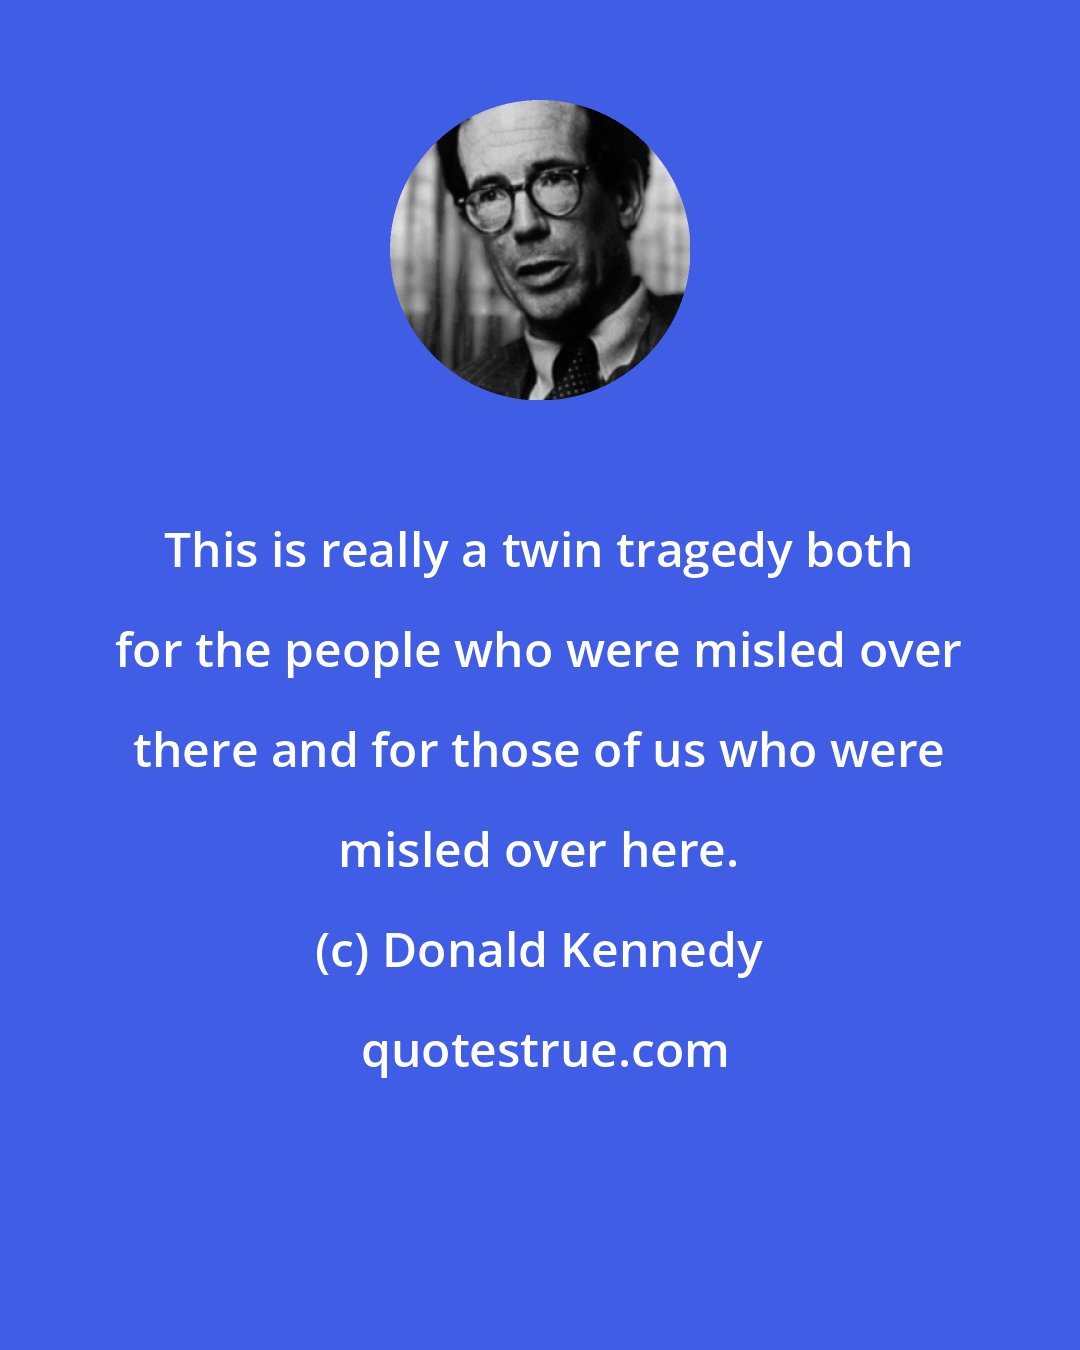 Donald Kennedy: This is really a twin tragedy both for the people who were misled over there and for those of us who were misled over here.